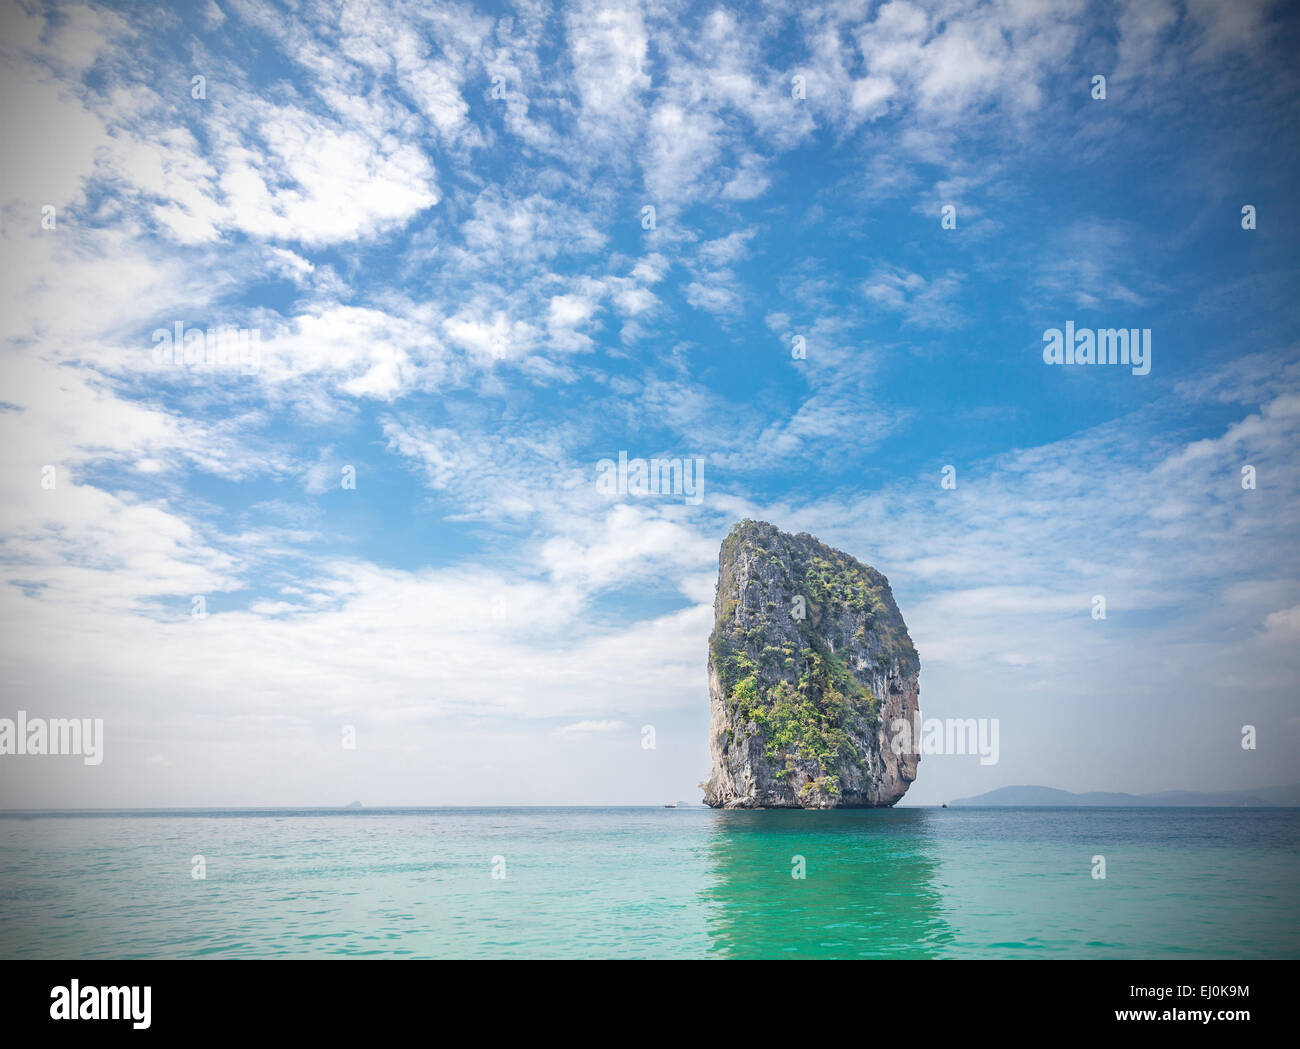 Tropical island located in Krabi province, Thailand. Vignette effect applied. Stock Photo